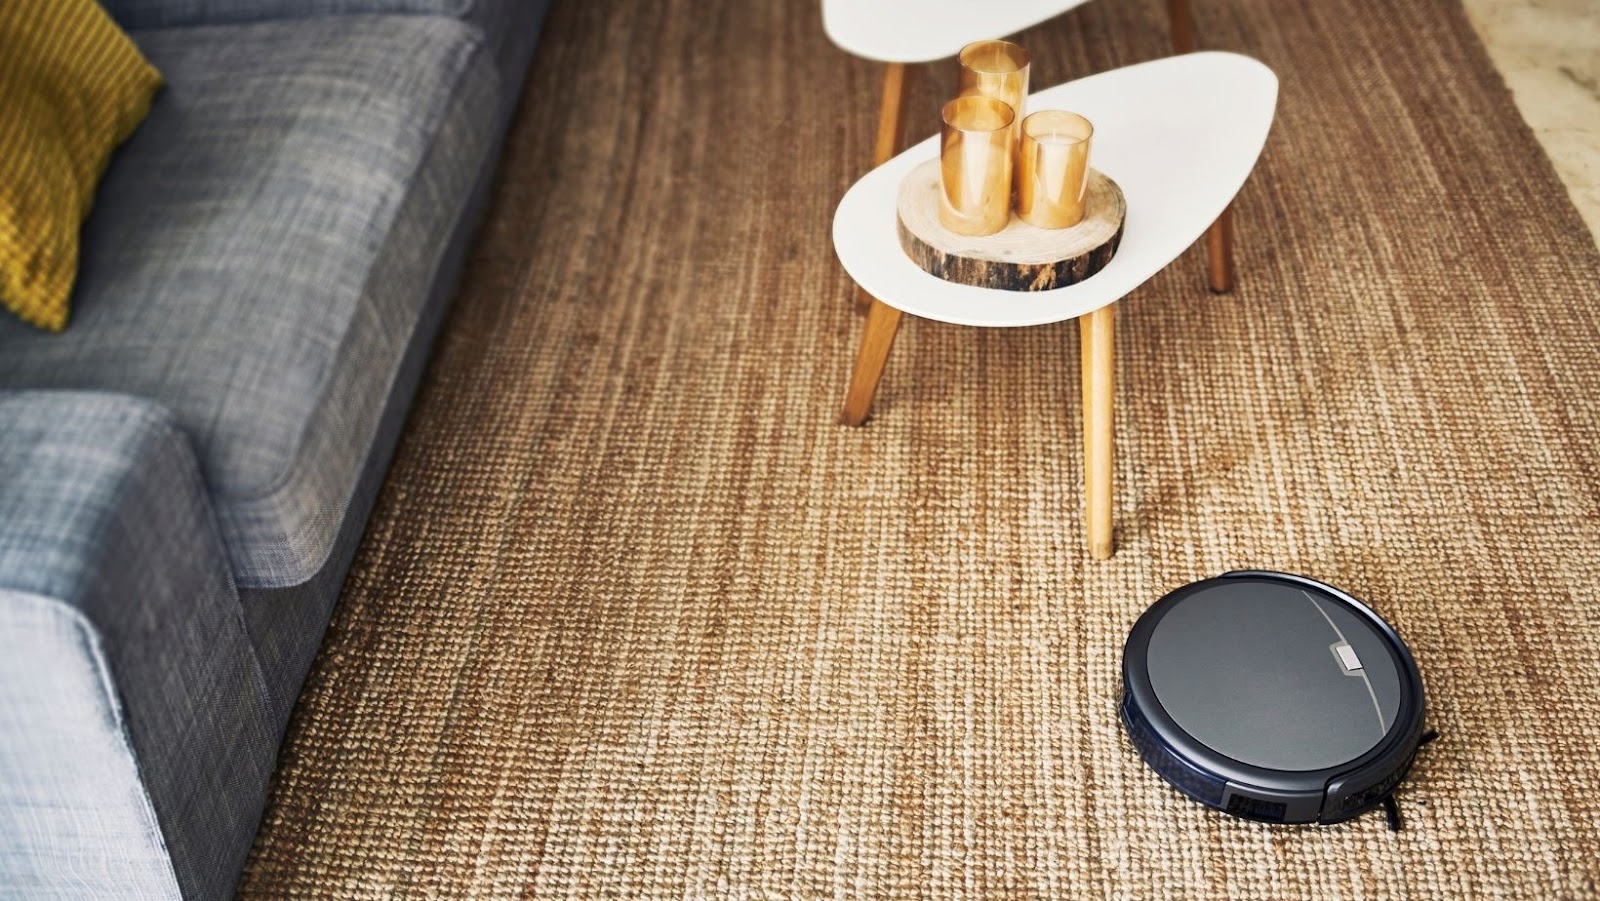 Get the most out of your roomba with these tips